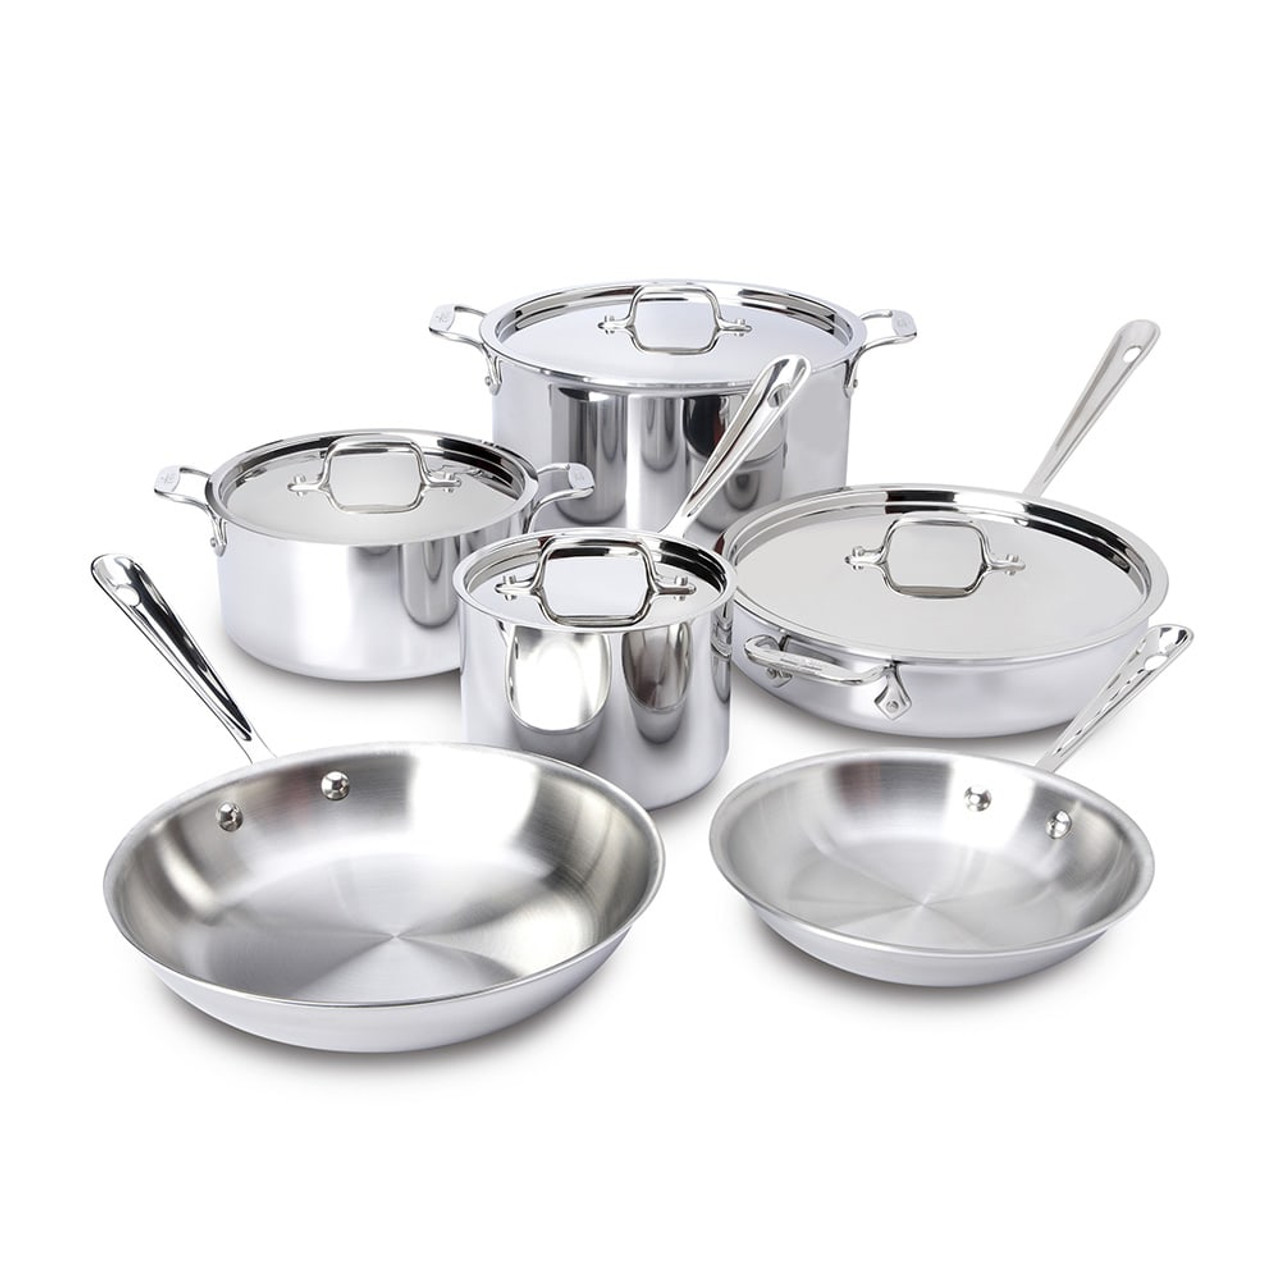 https://cdn11.bigcommerce.com/s-hccytny0od/images/stencil/1280x1280/products/484/8435/all-clad-stainless-10-piece-cookware-set__81897.1598234951.jpg?c=2?imbypass=on